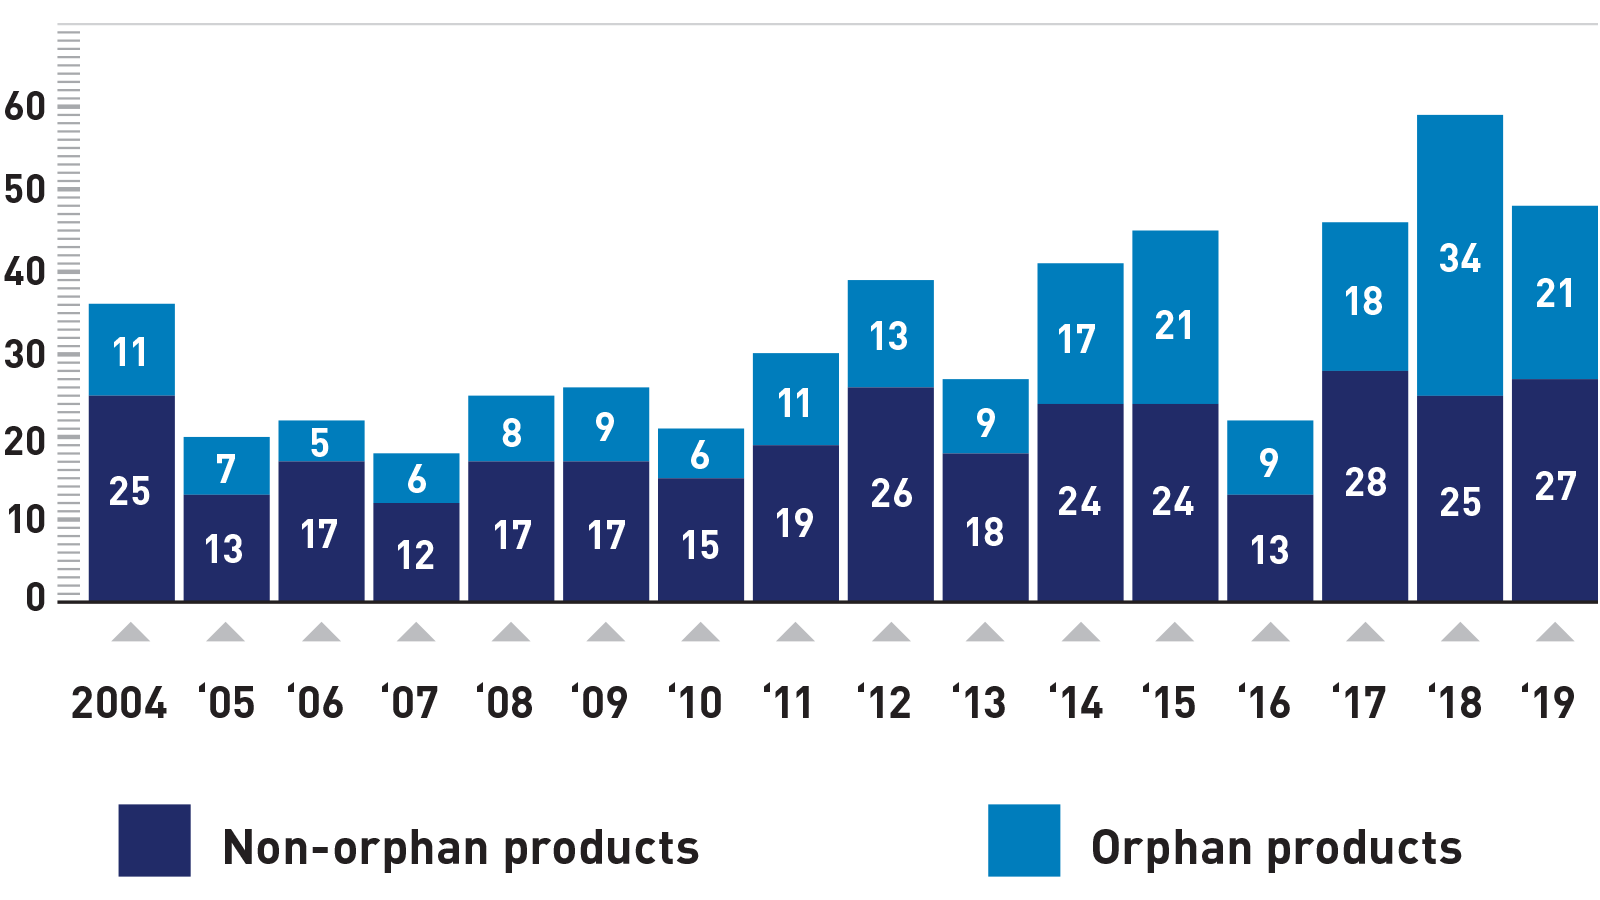 Number of novel drugs receiving orphan designation by year of approval 2004 - 2019